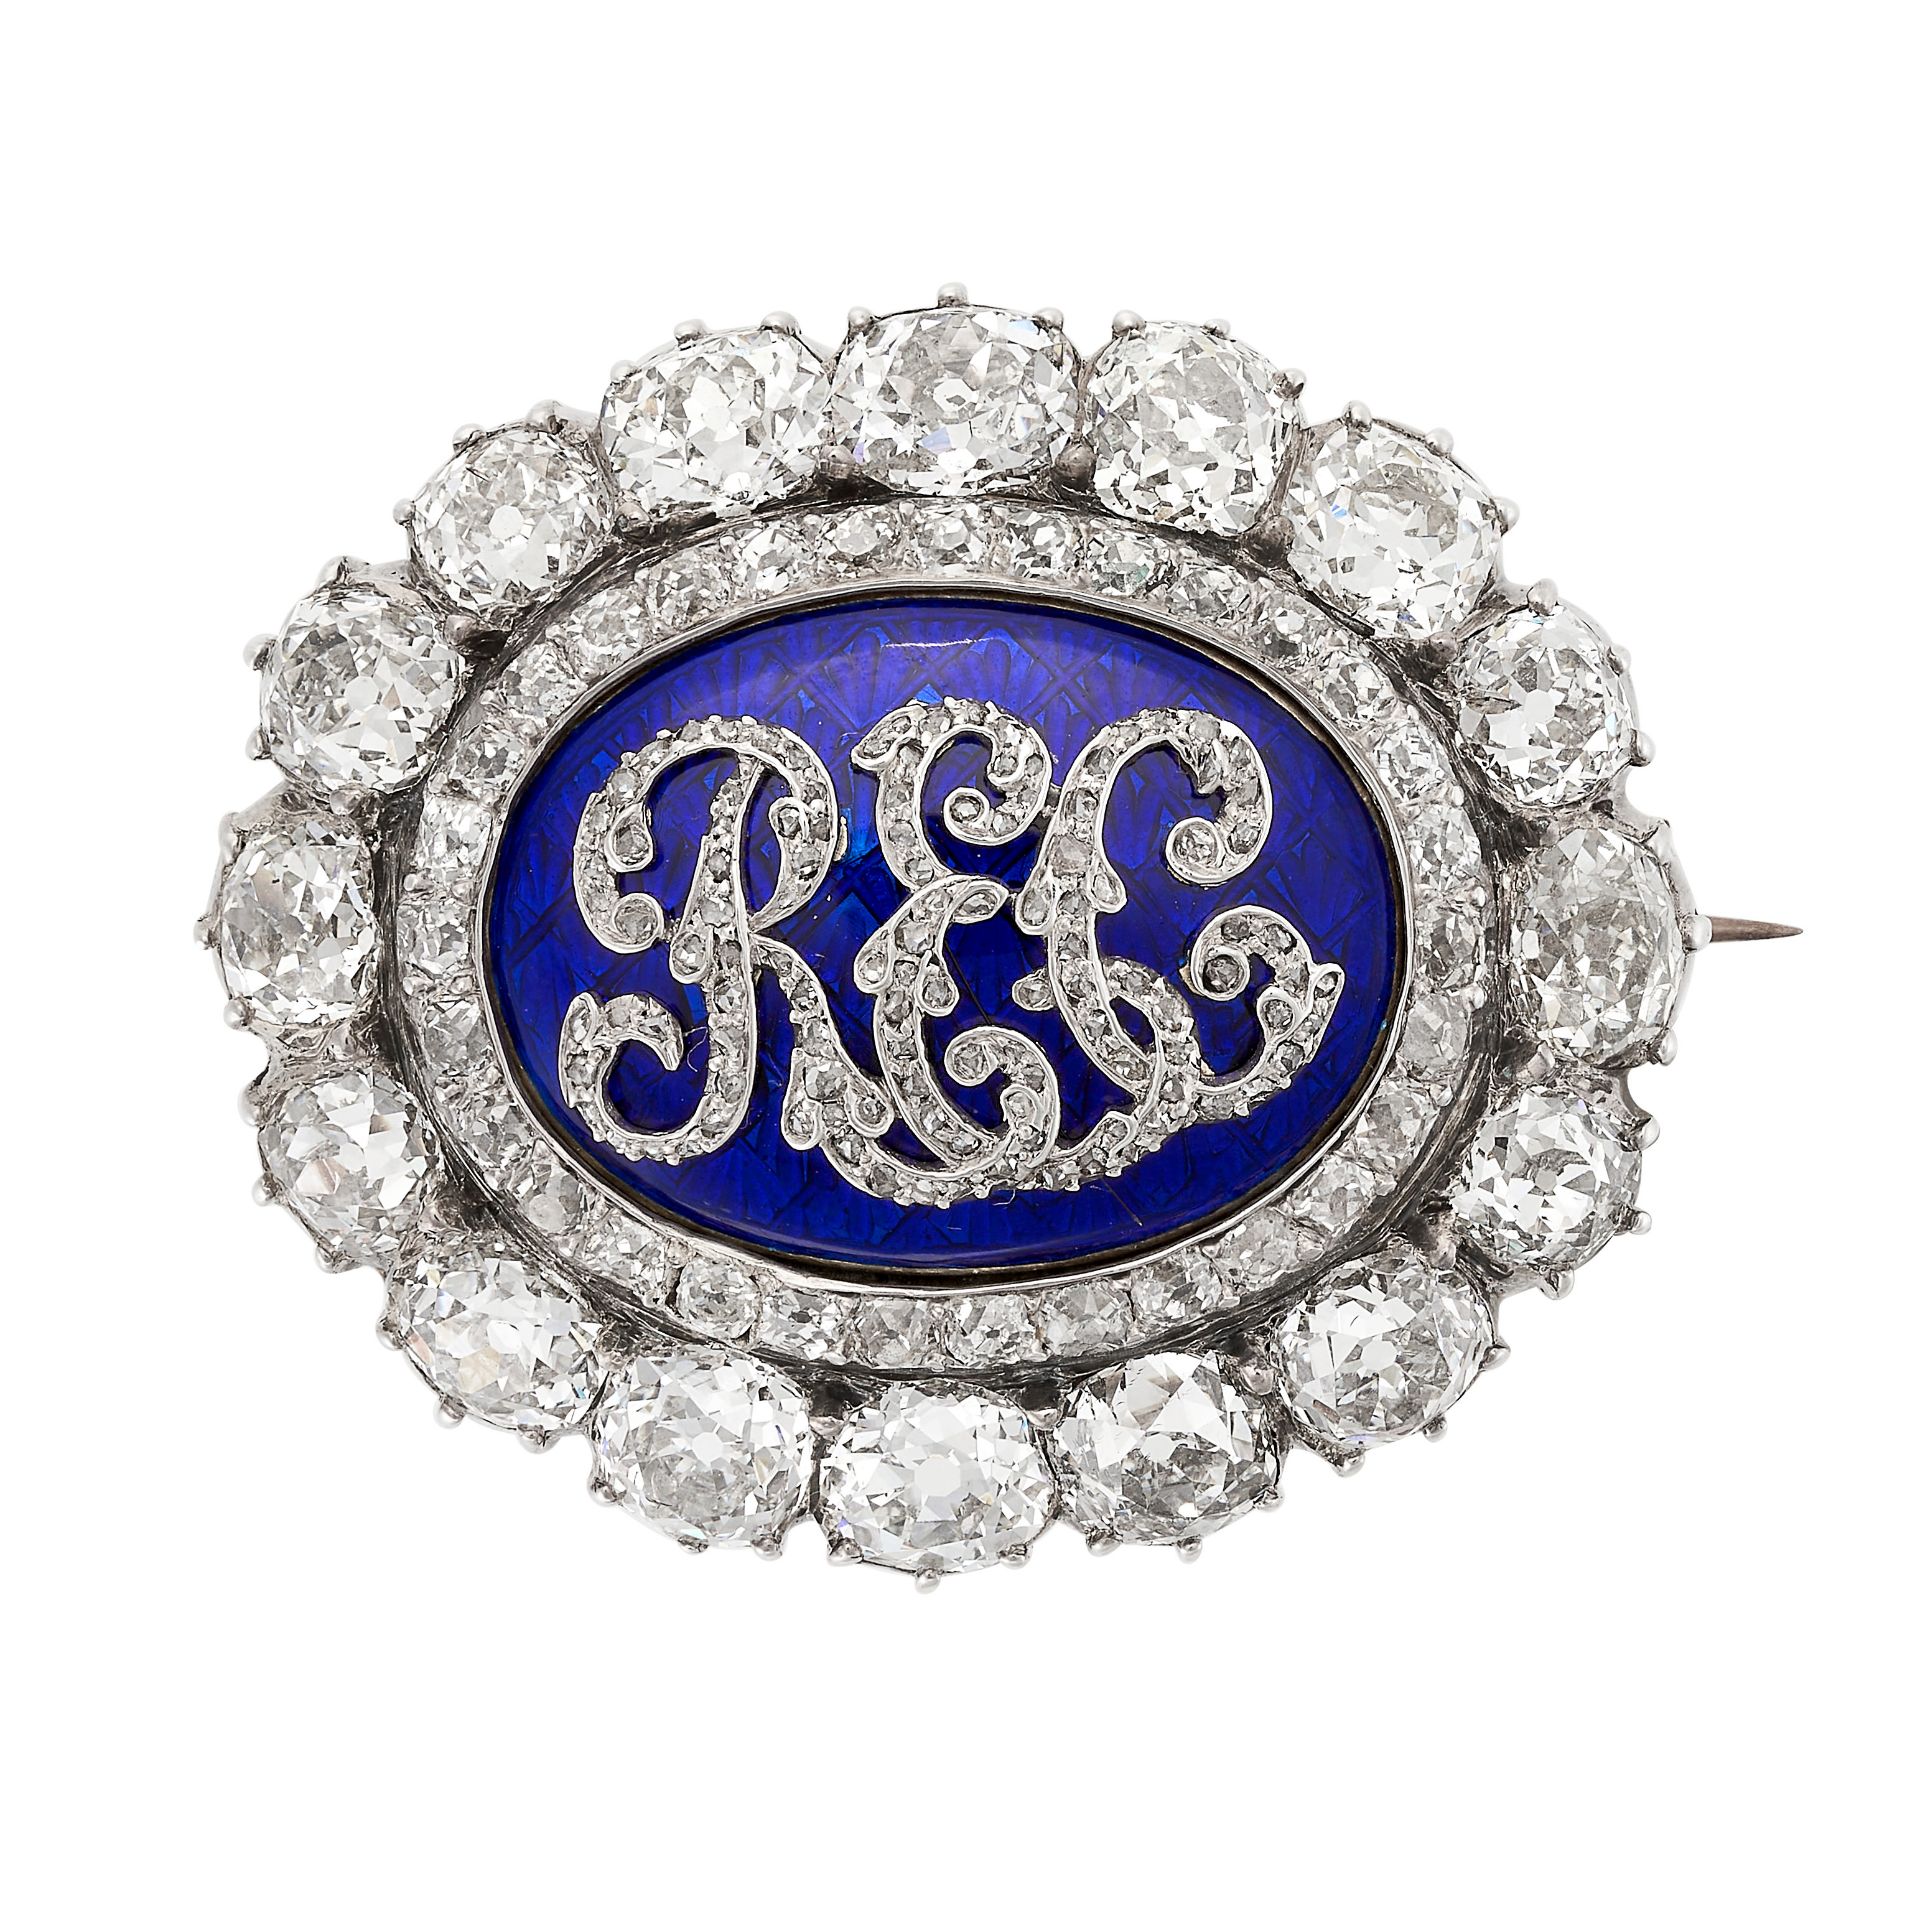 NO RESERVE - A FINE ANTIQUE VICTORIAN DIAMOND AND ENAMEL MOURNING LOCKET BROOCH, 19TH CENTURY in